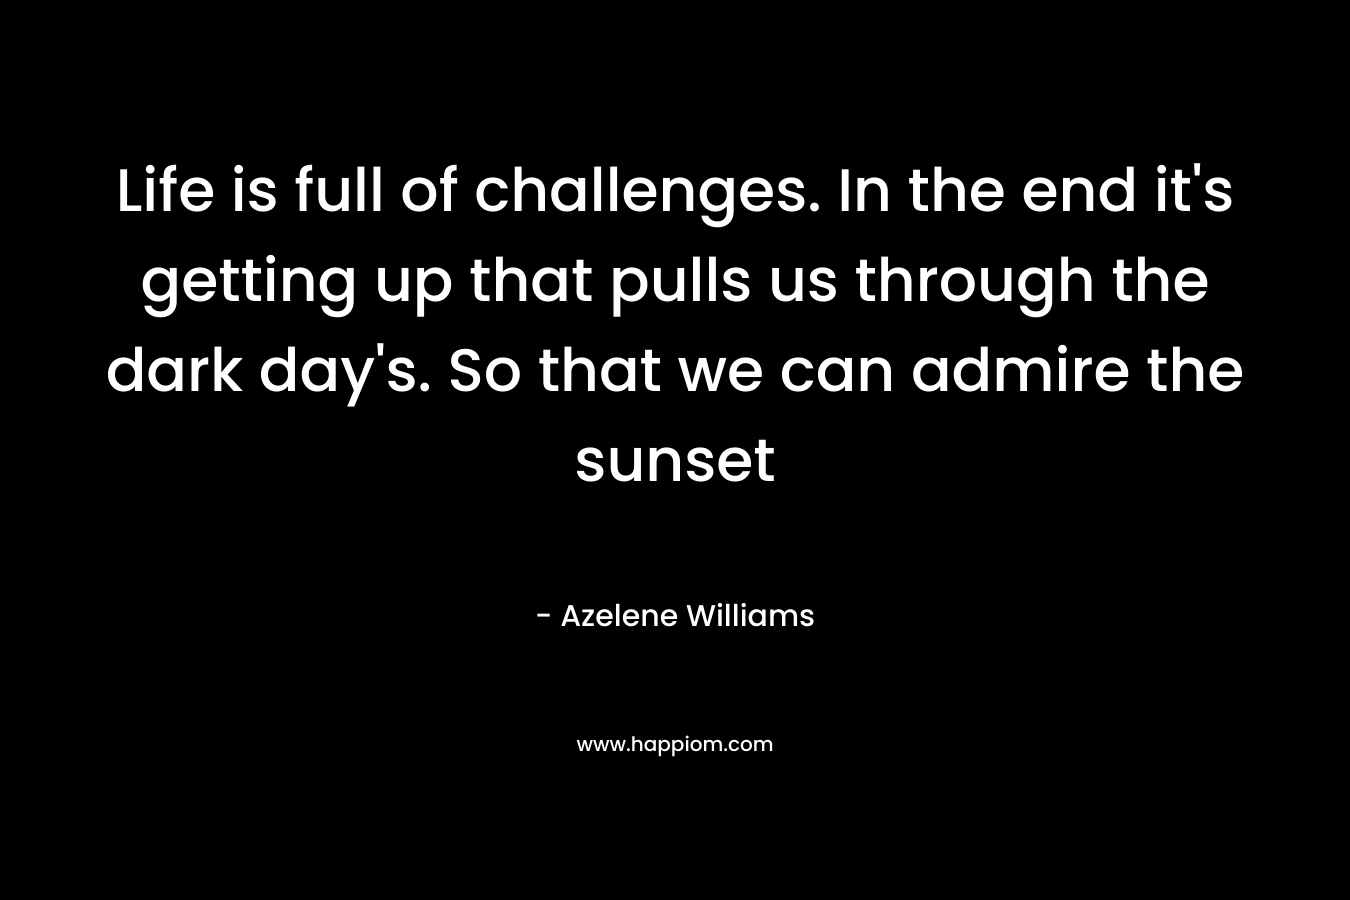 Life is full of challenges. In the end it’s getting up that pulls us through the dark day’s. So that we can admire the sunset – Azelene Williams